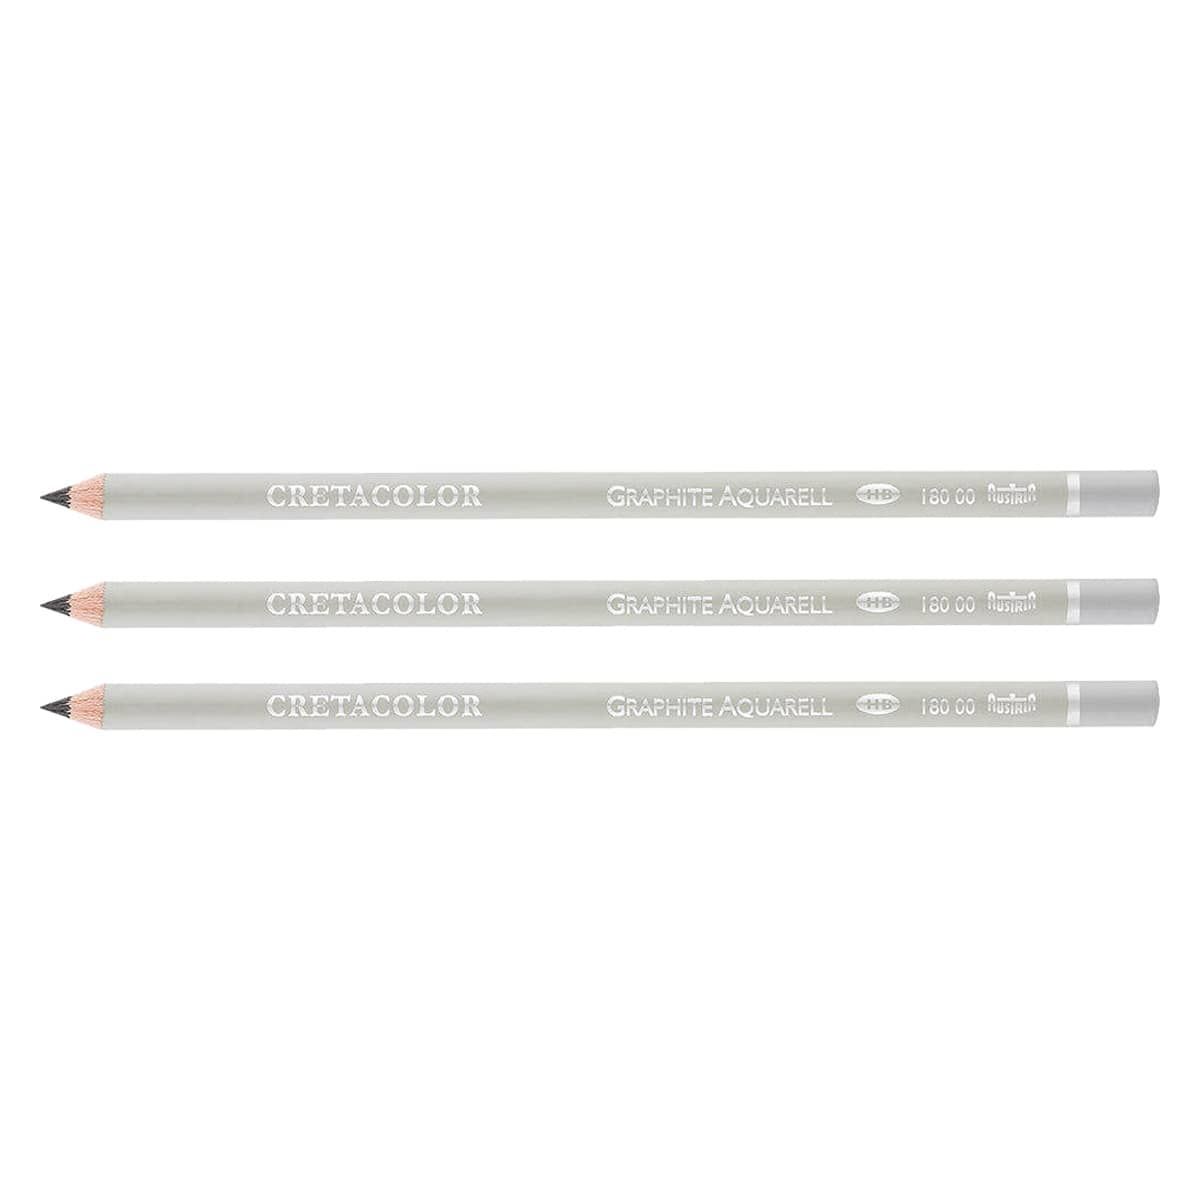 Faber-Castell Graphite Aquarelle Water-soluble Pencils